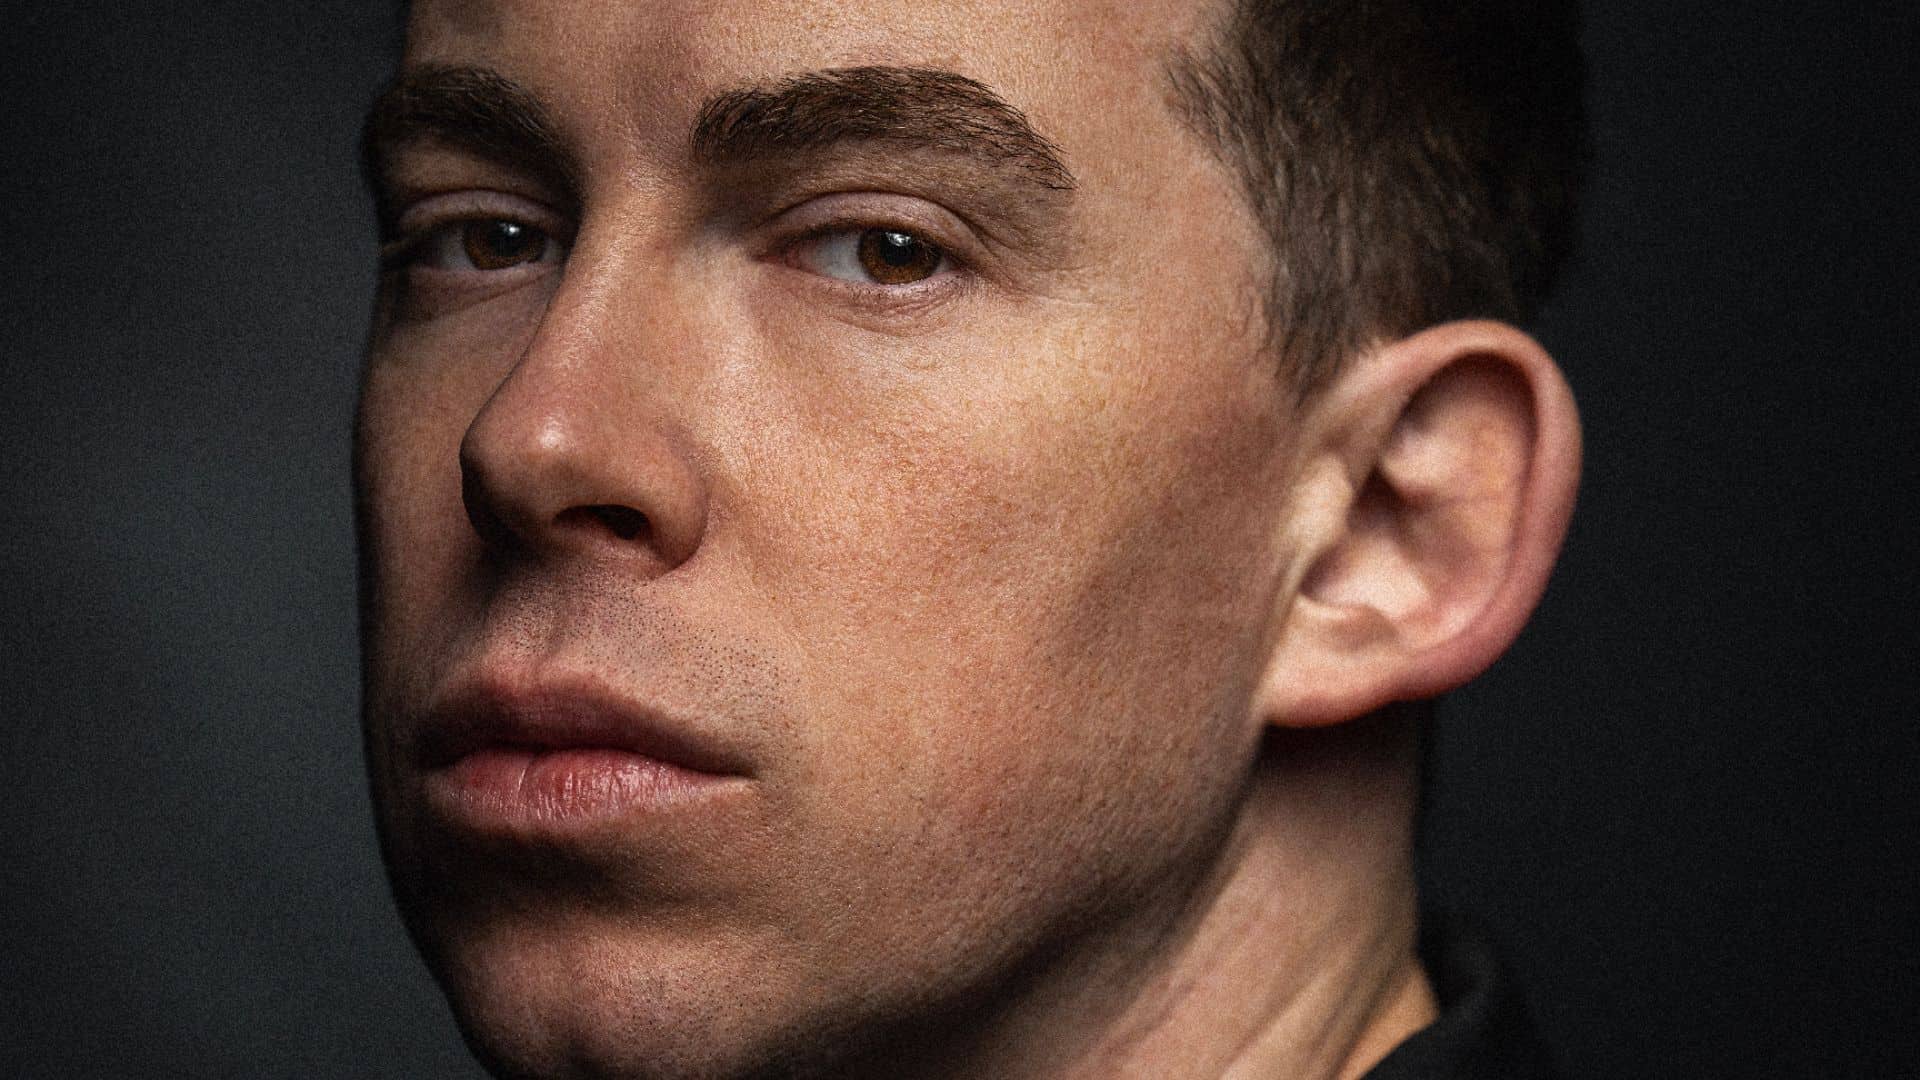 Hardwell confirms to perform at Berlin’s techno club Berghain